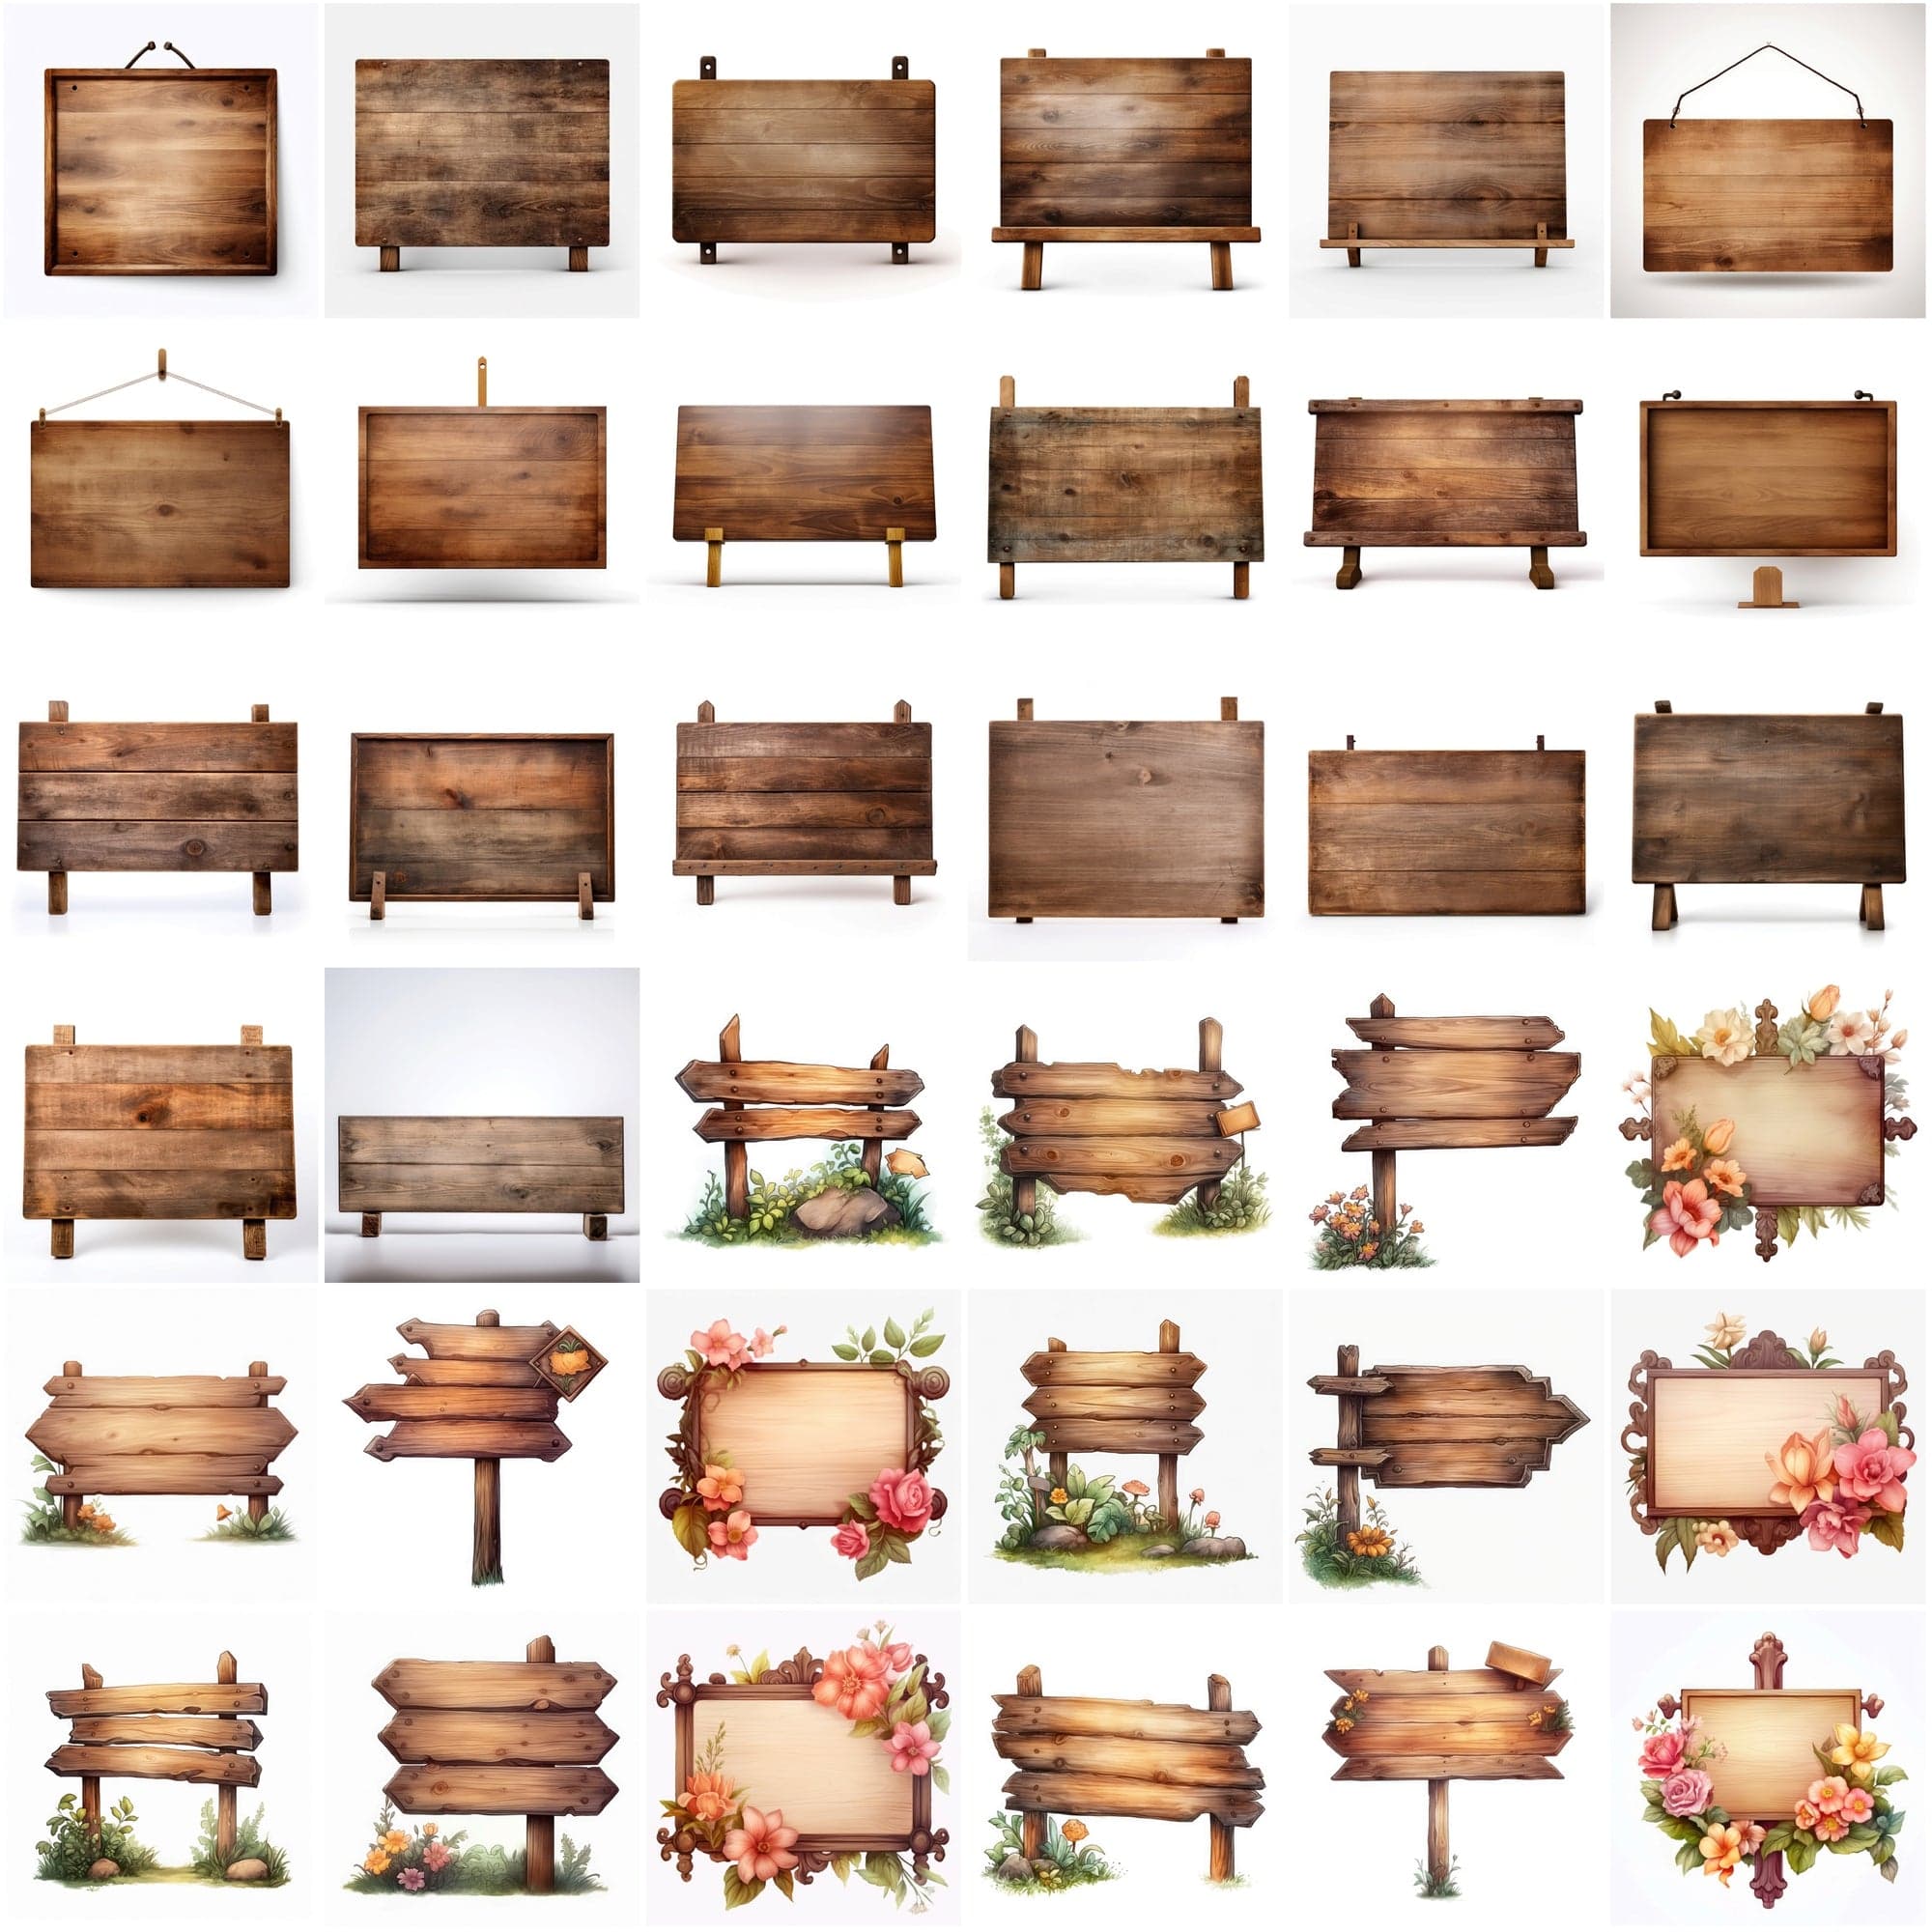 Download 345 Vibrant Wood Sign & Board Images with Text Space Digital Download Sumobundle